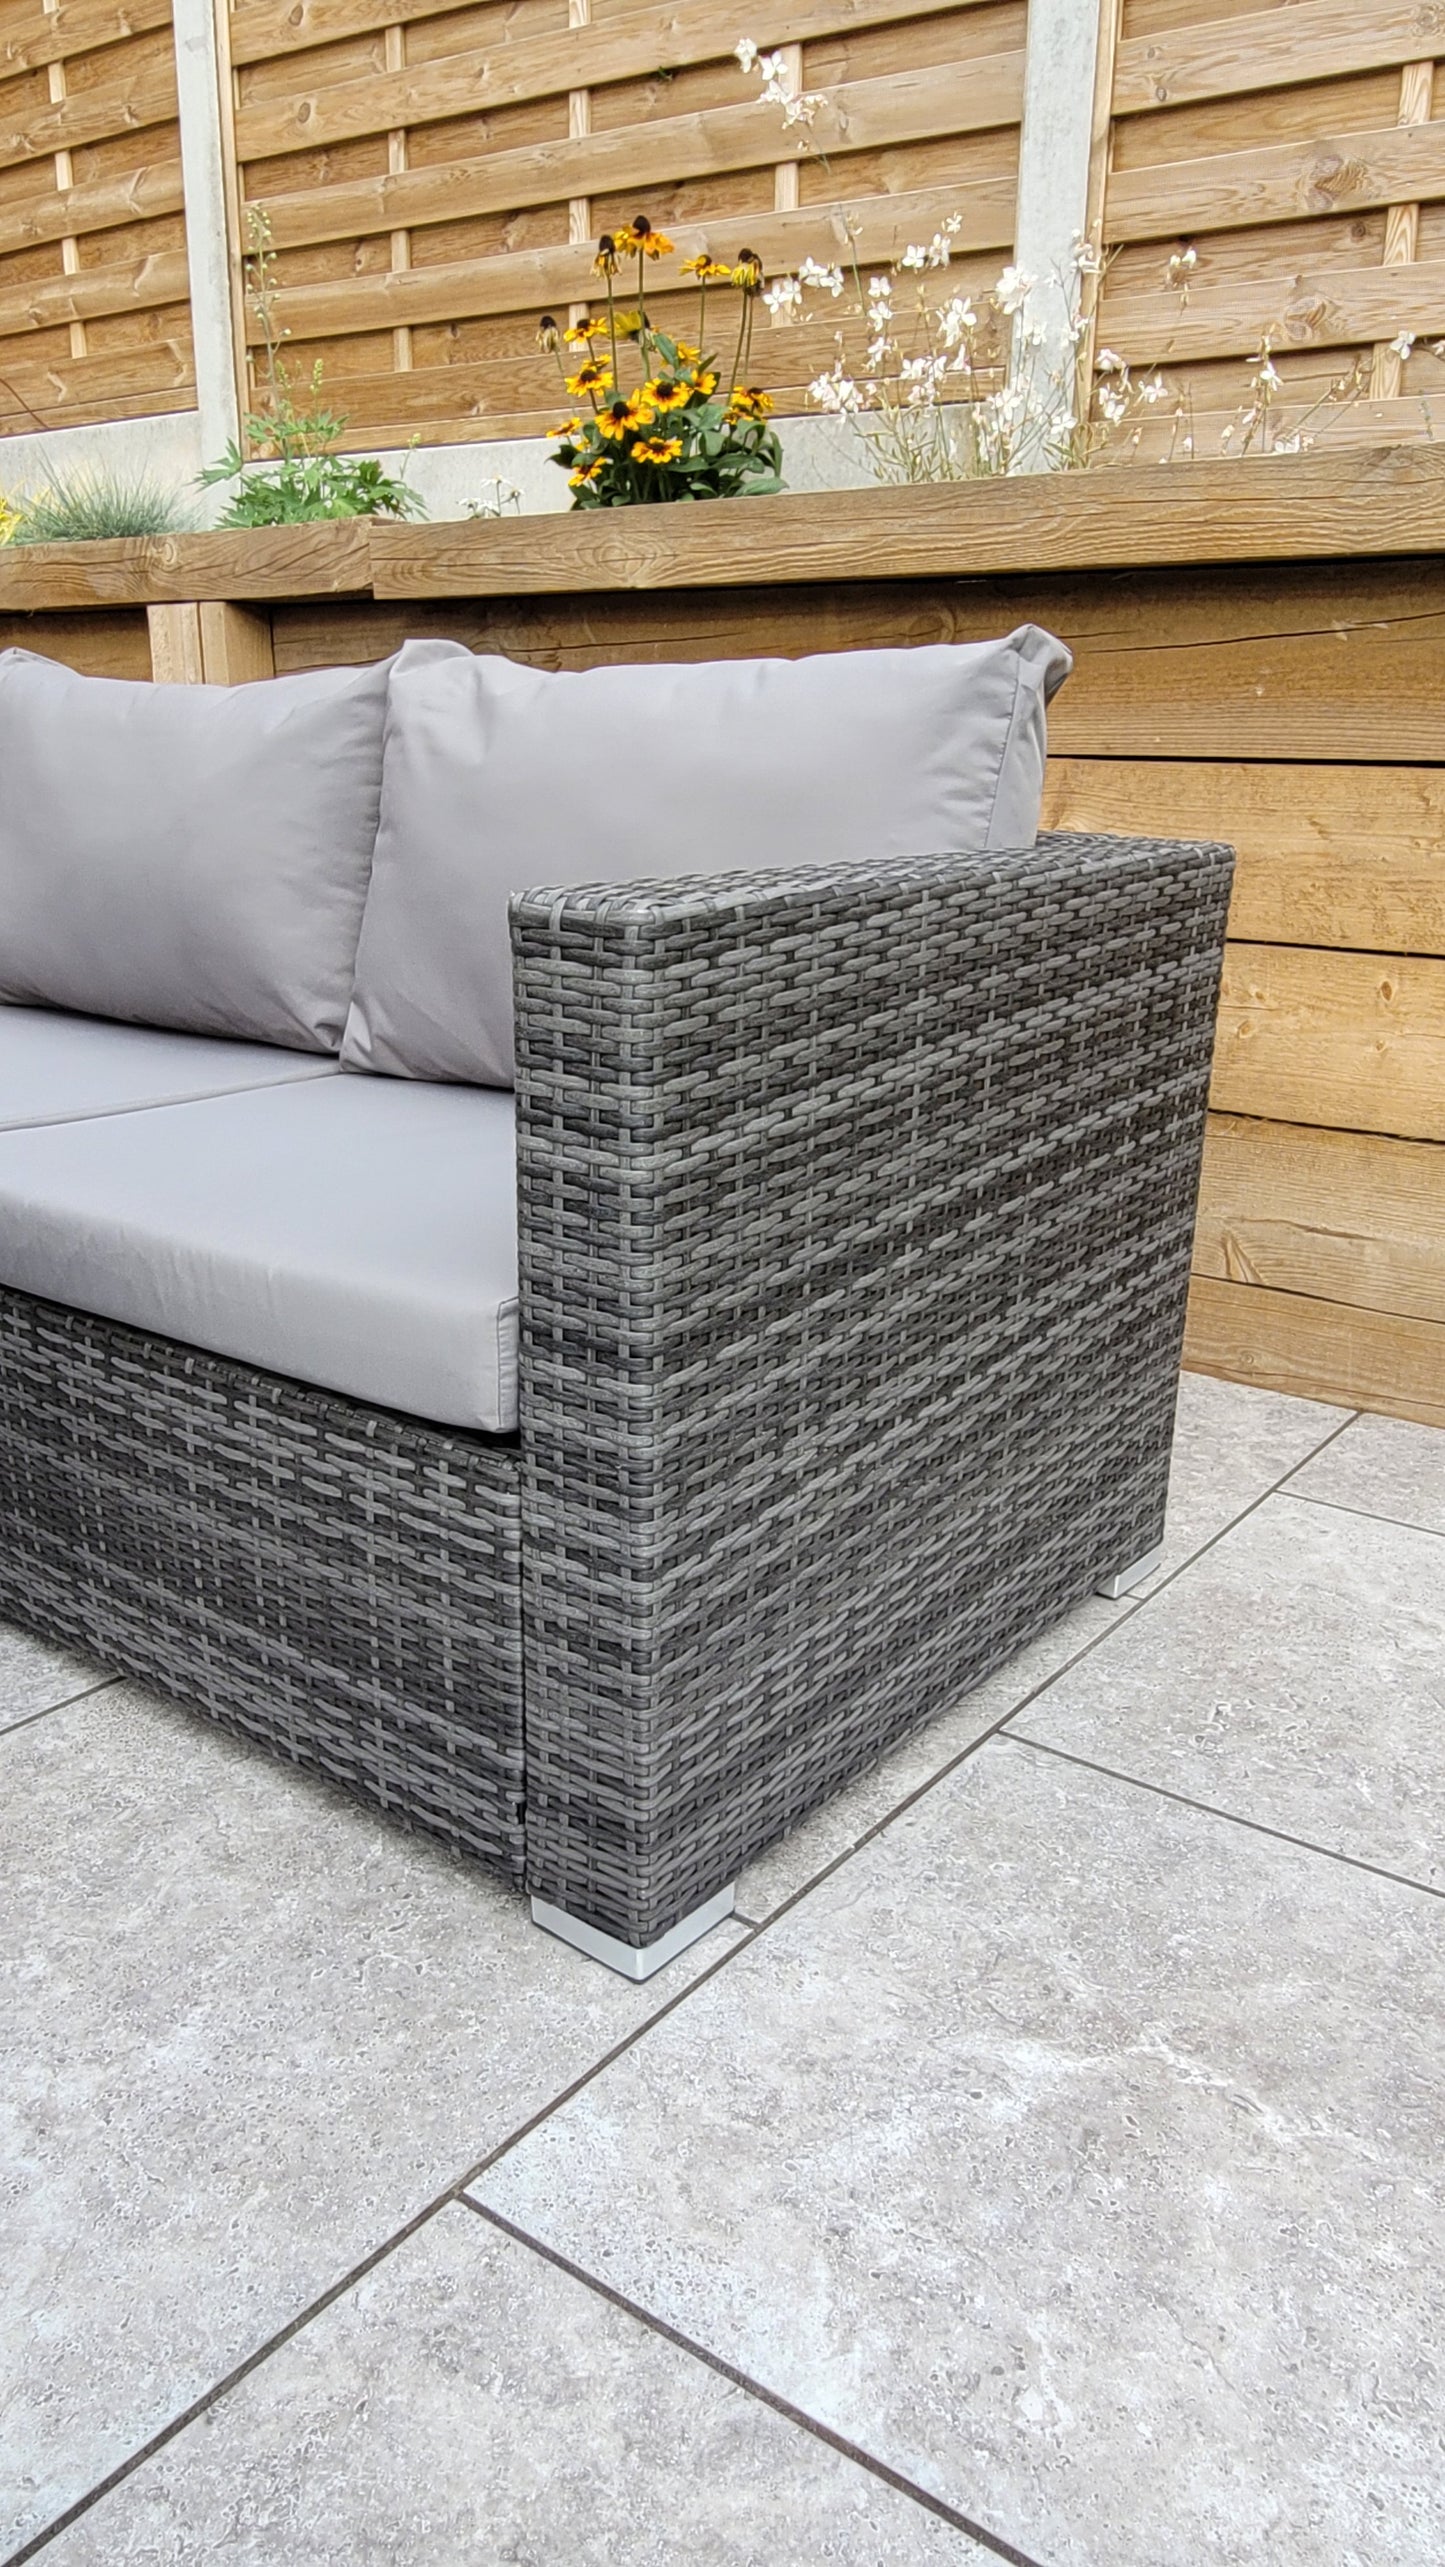 Signature Weave - Catalina corner dining sofa with lift table & ice bucket - Beyond outdoor living